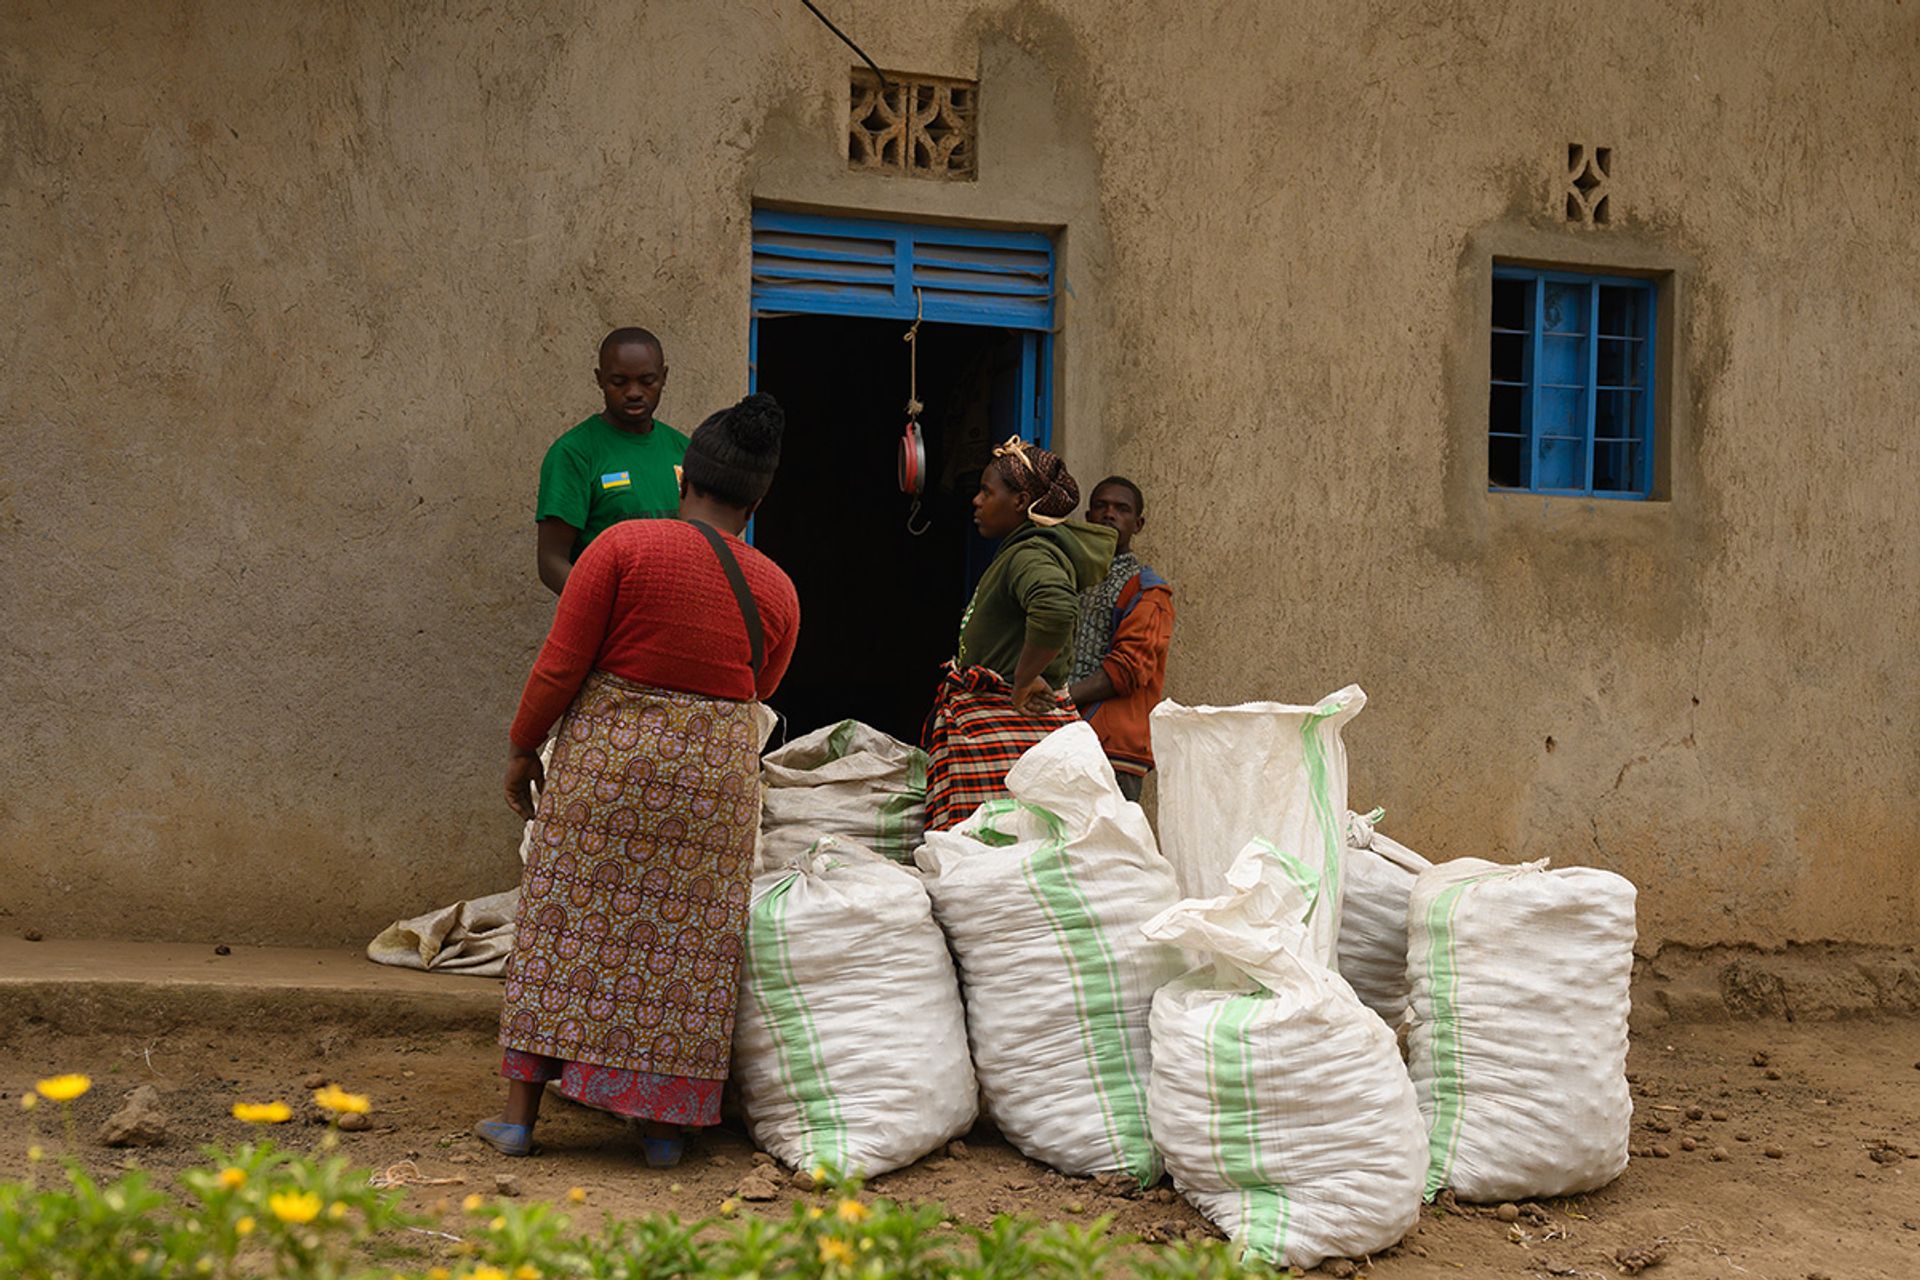 Potatoes are collected and put into sacks before being transported to the village centre for sale.